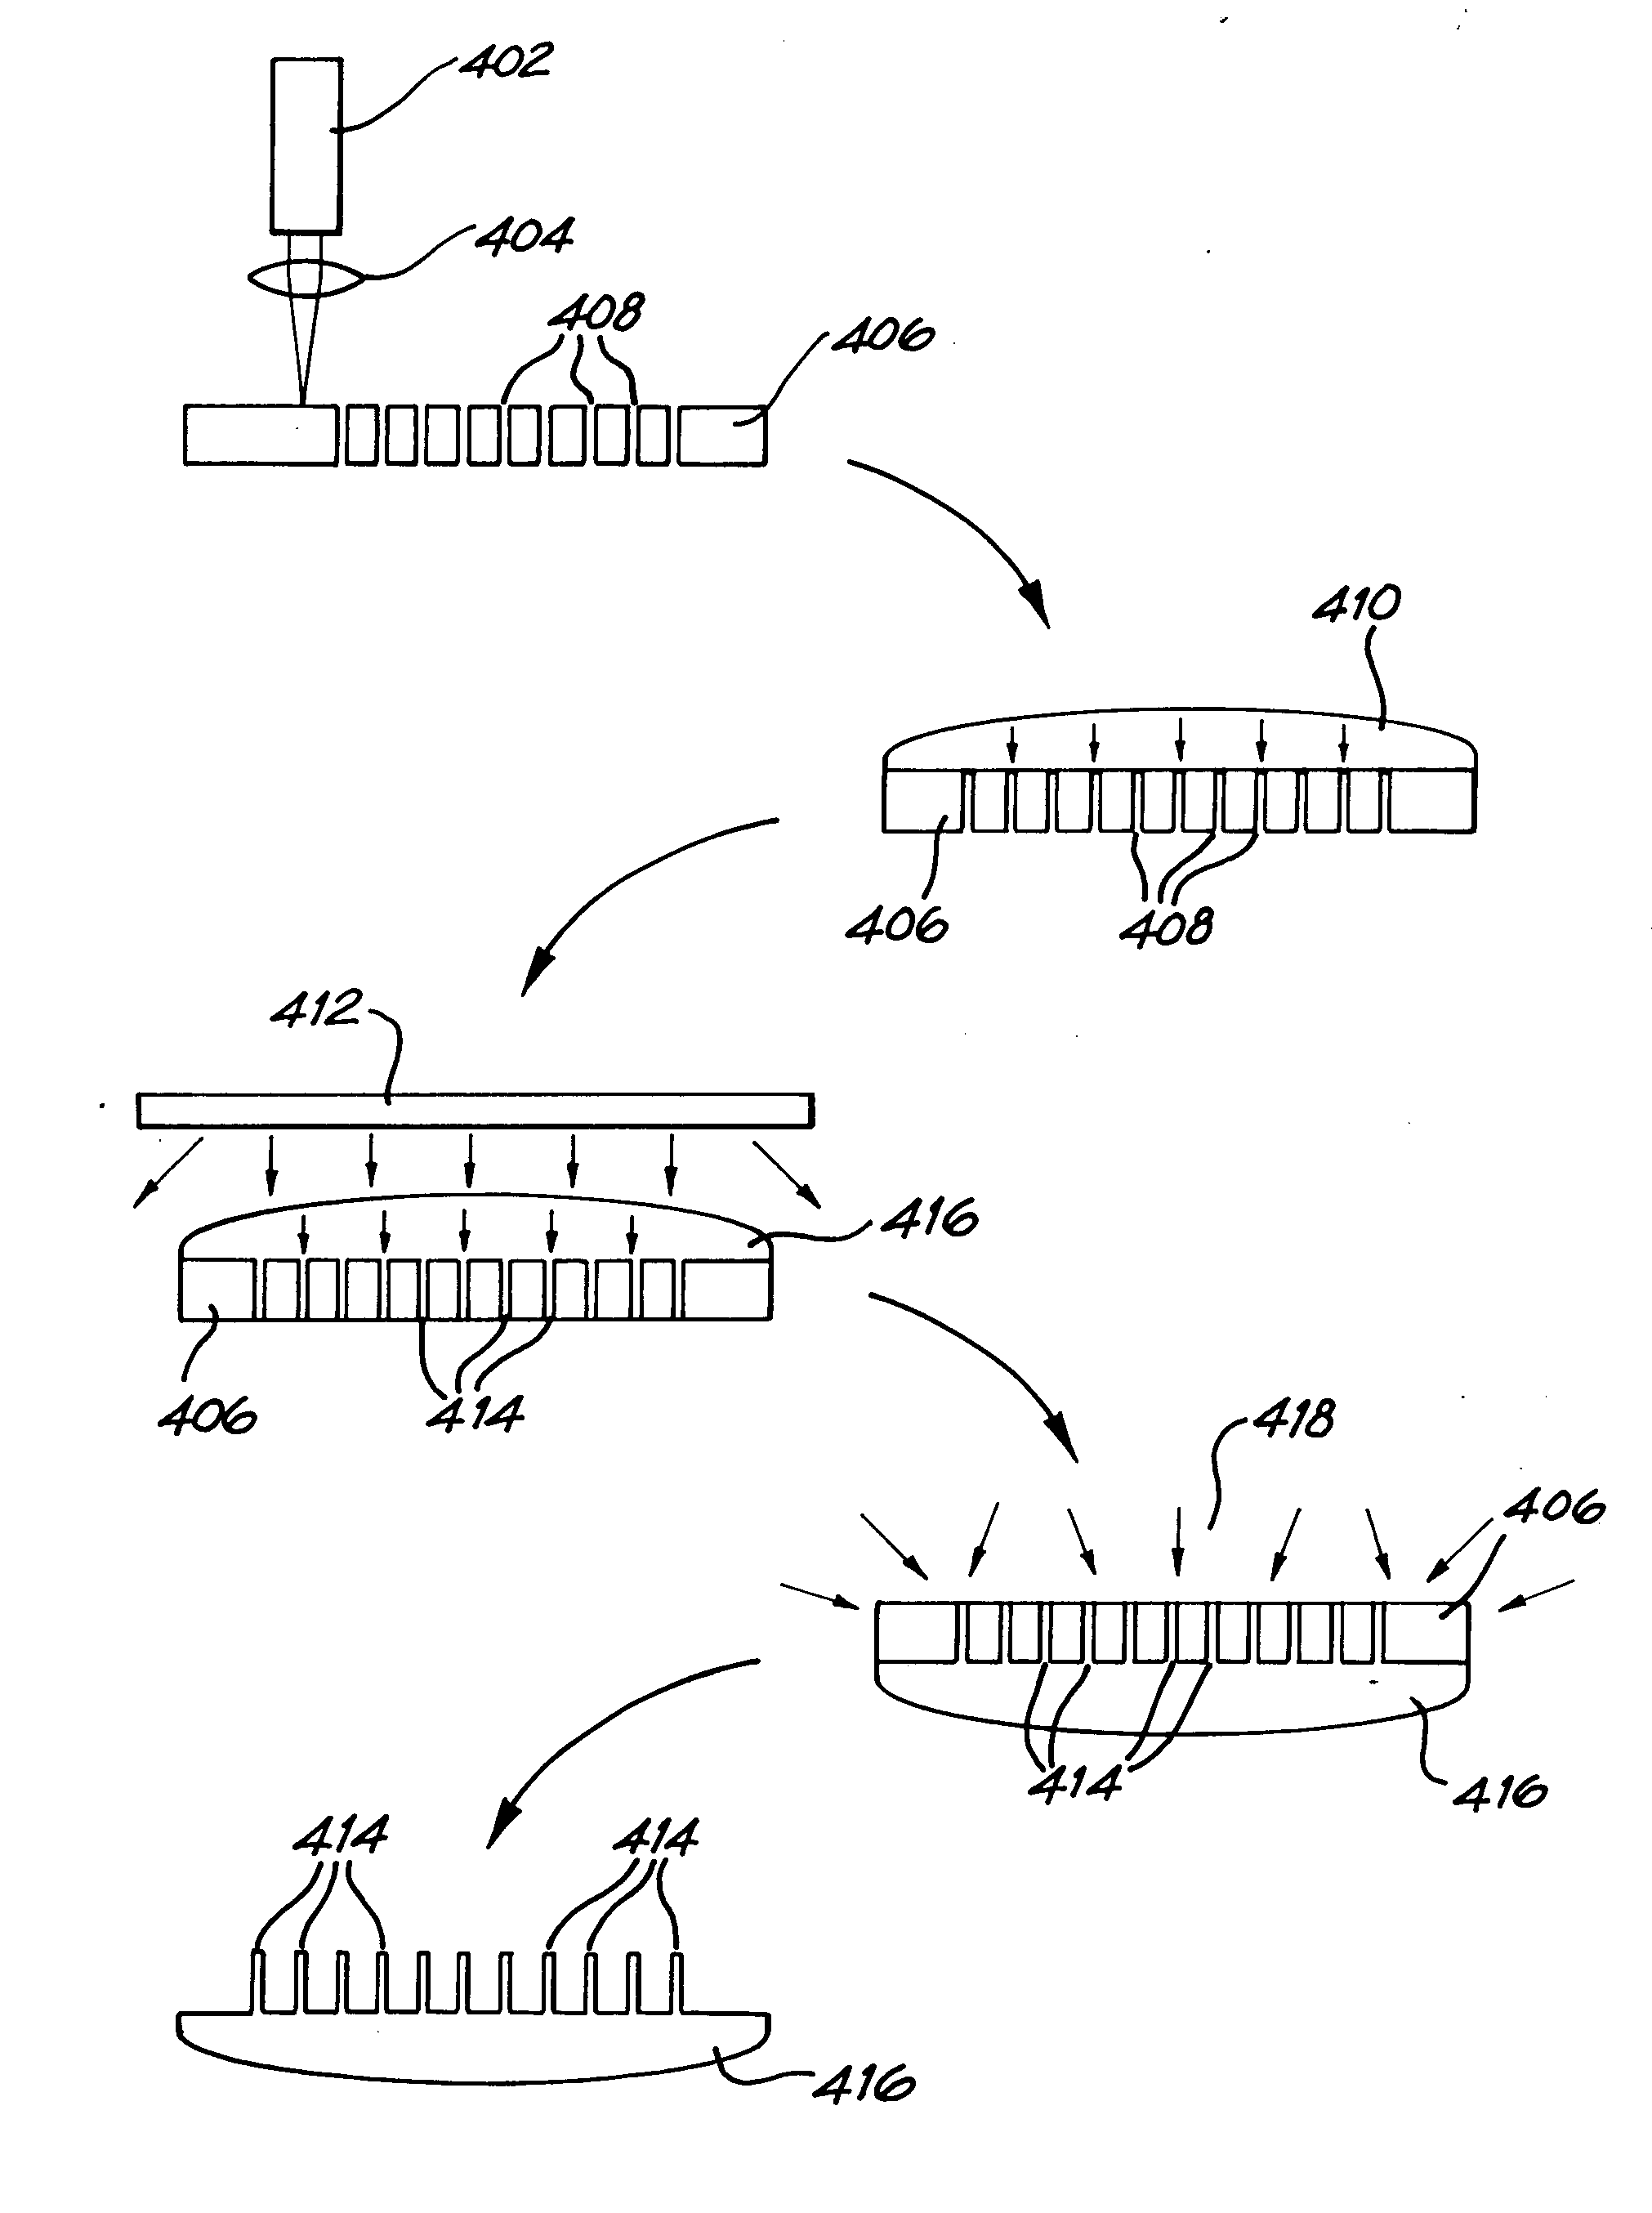 Microstructures and methods of fabricating